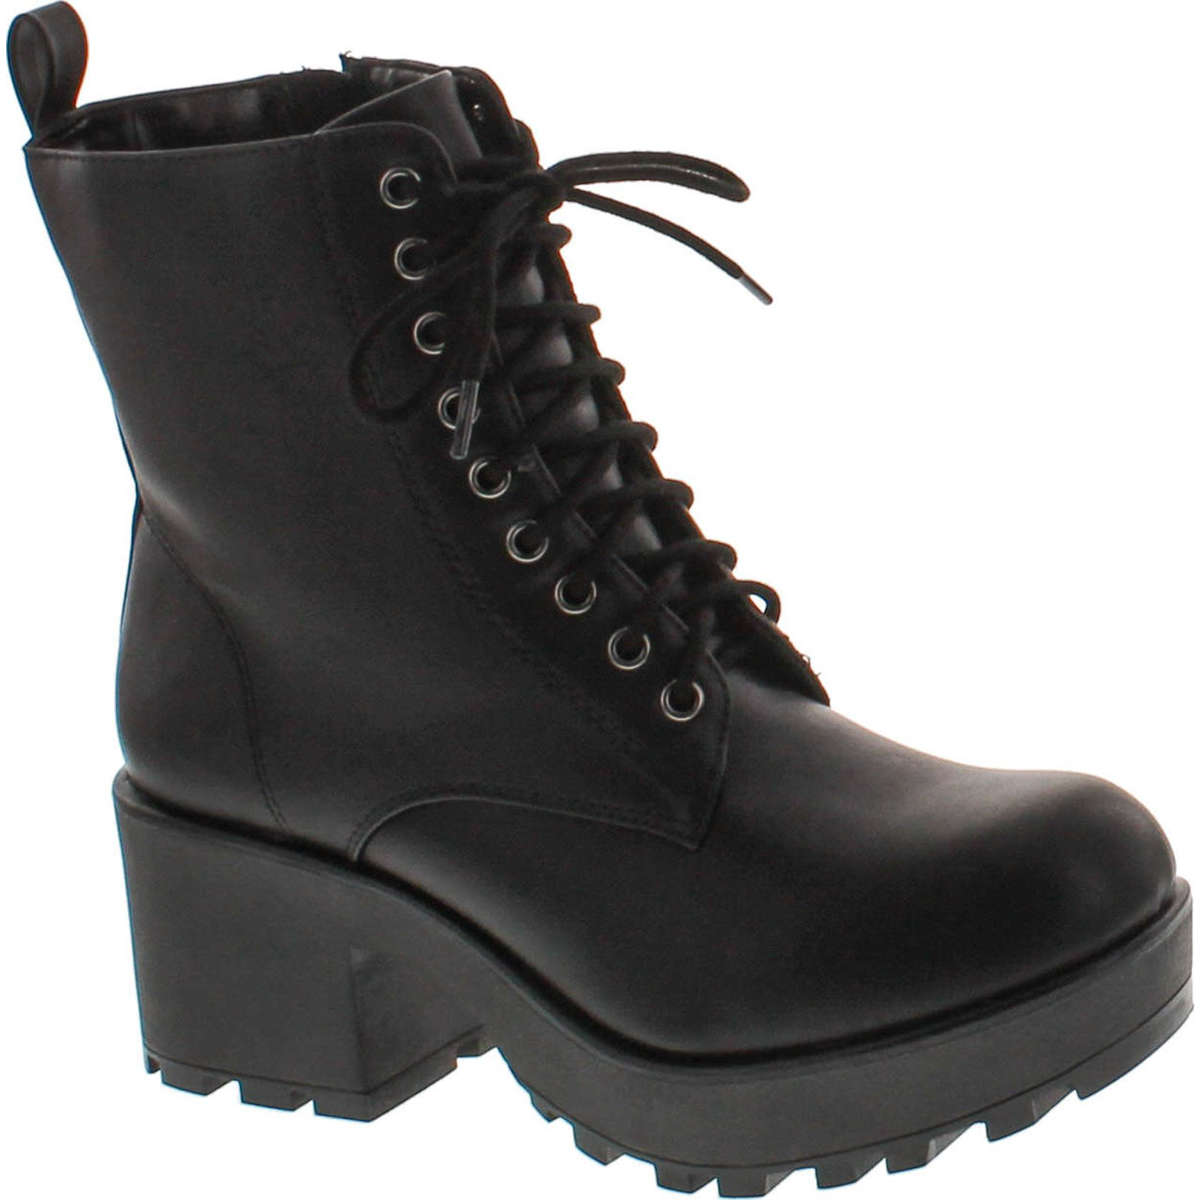 lace up mid heel boots